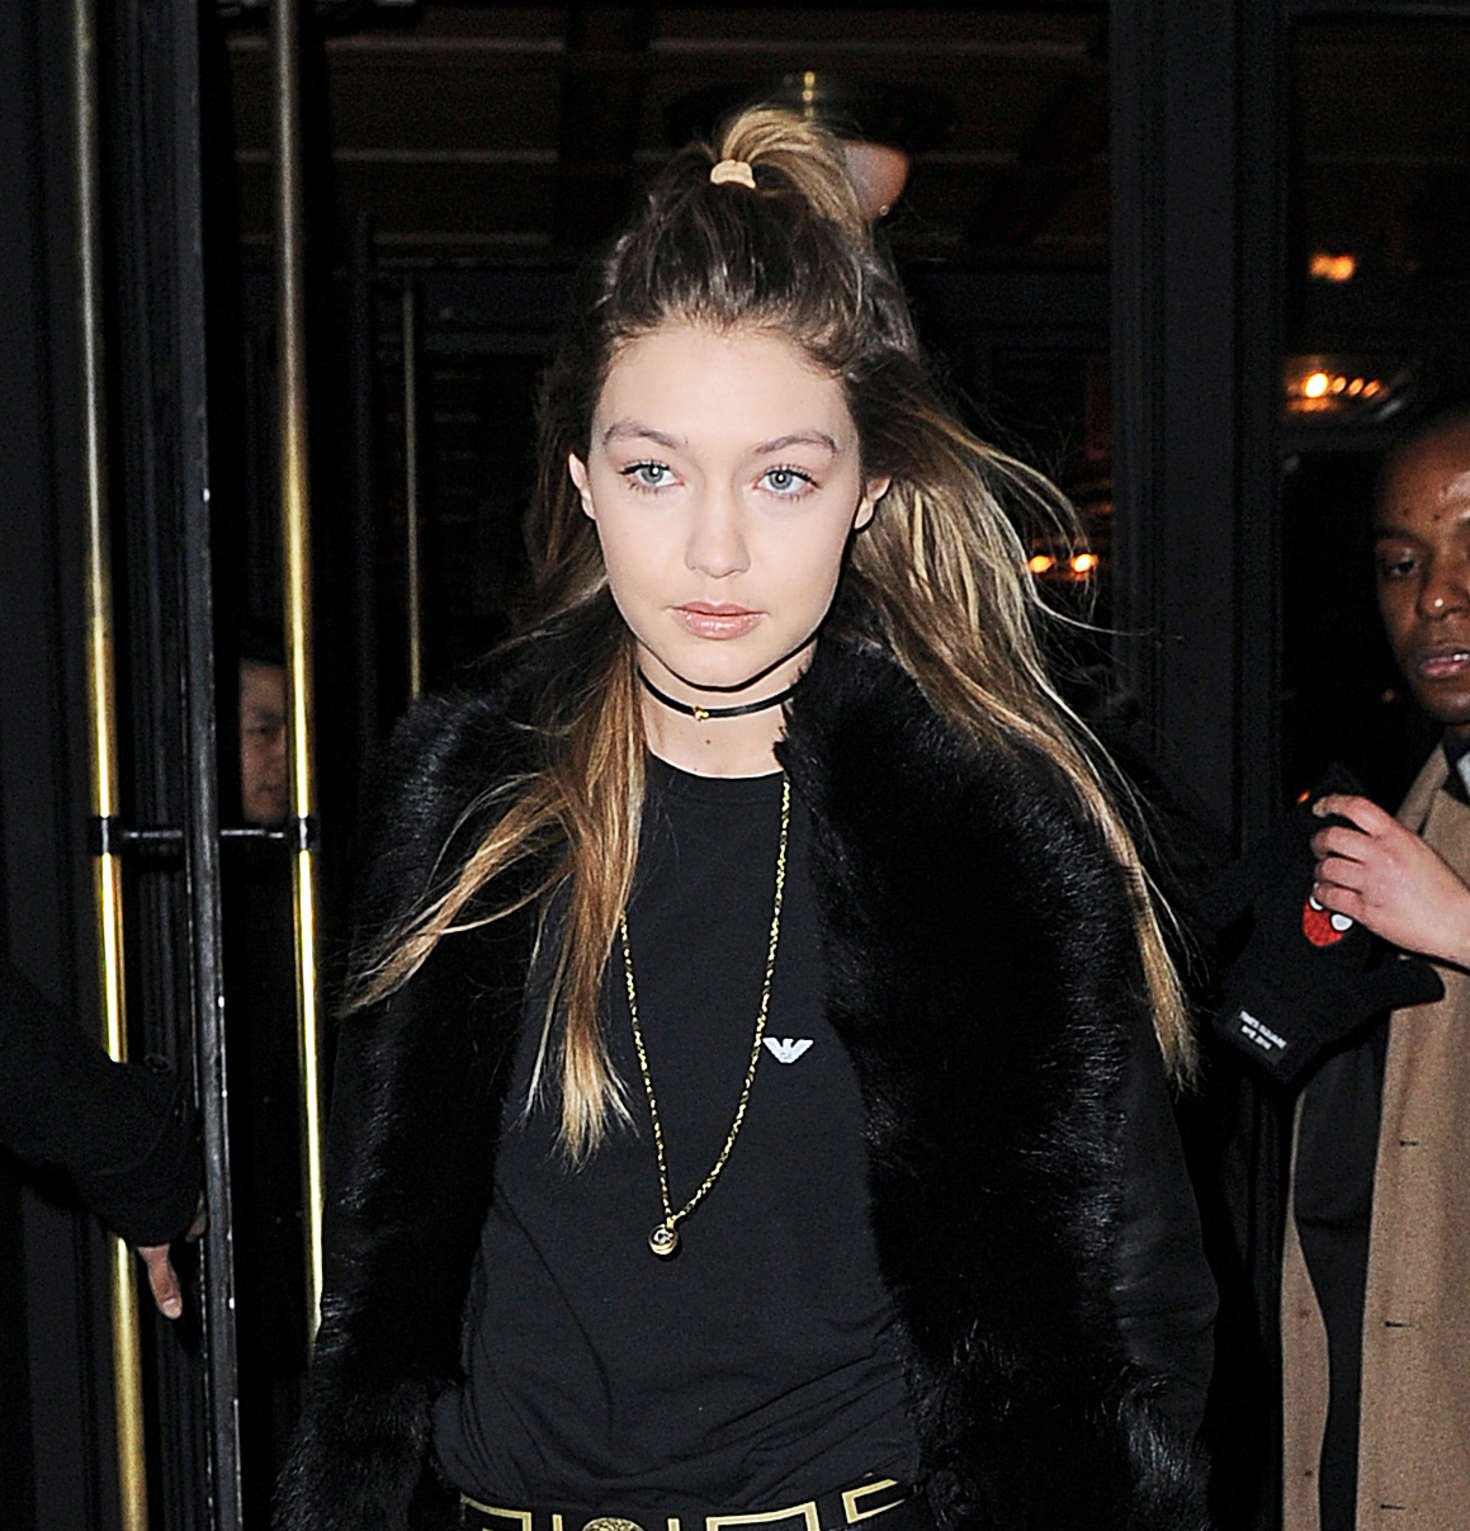 Gigi Hadid step out of an apartment building